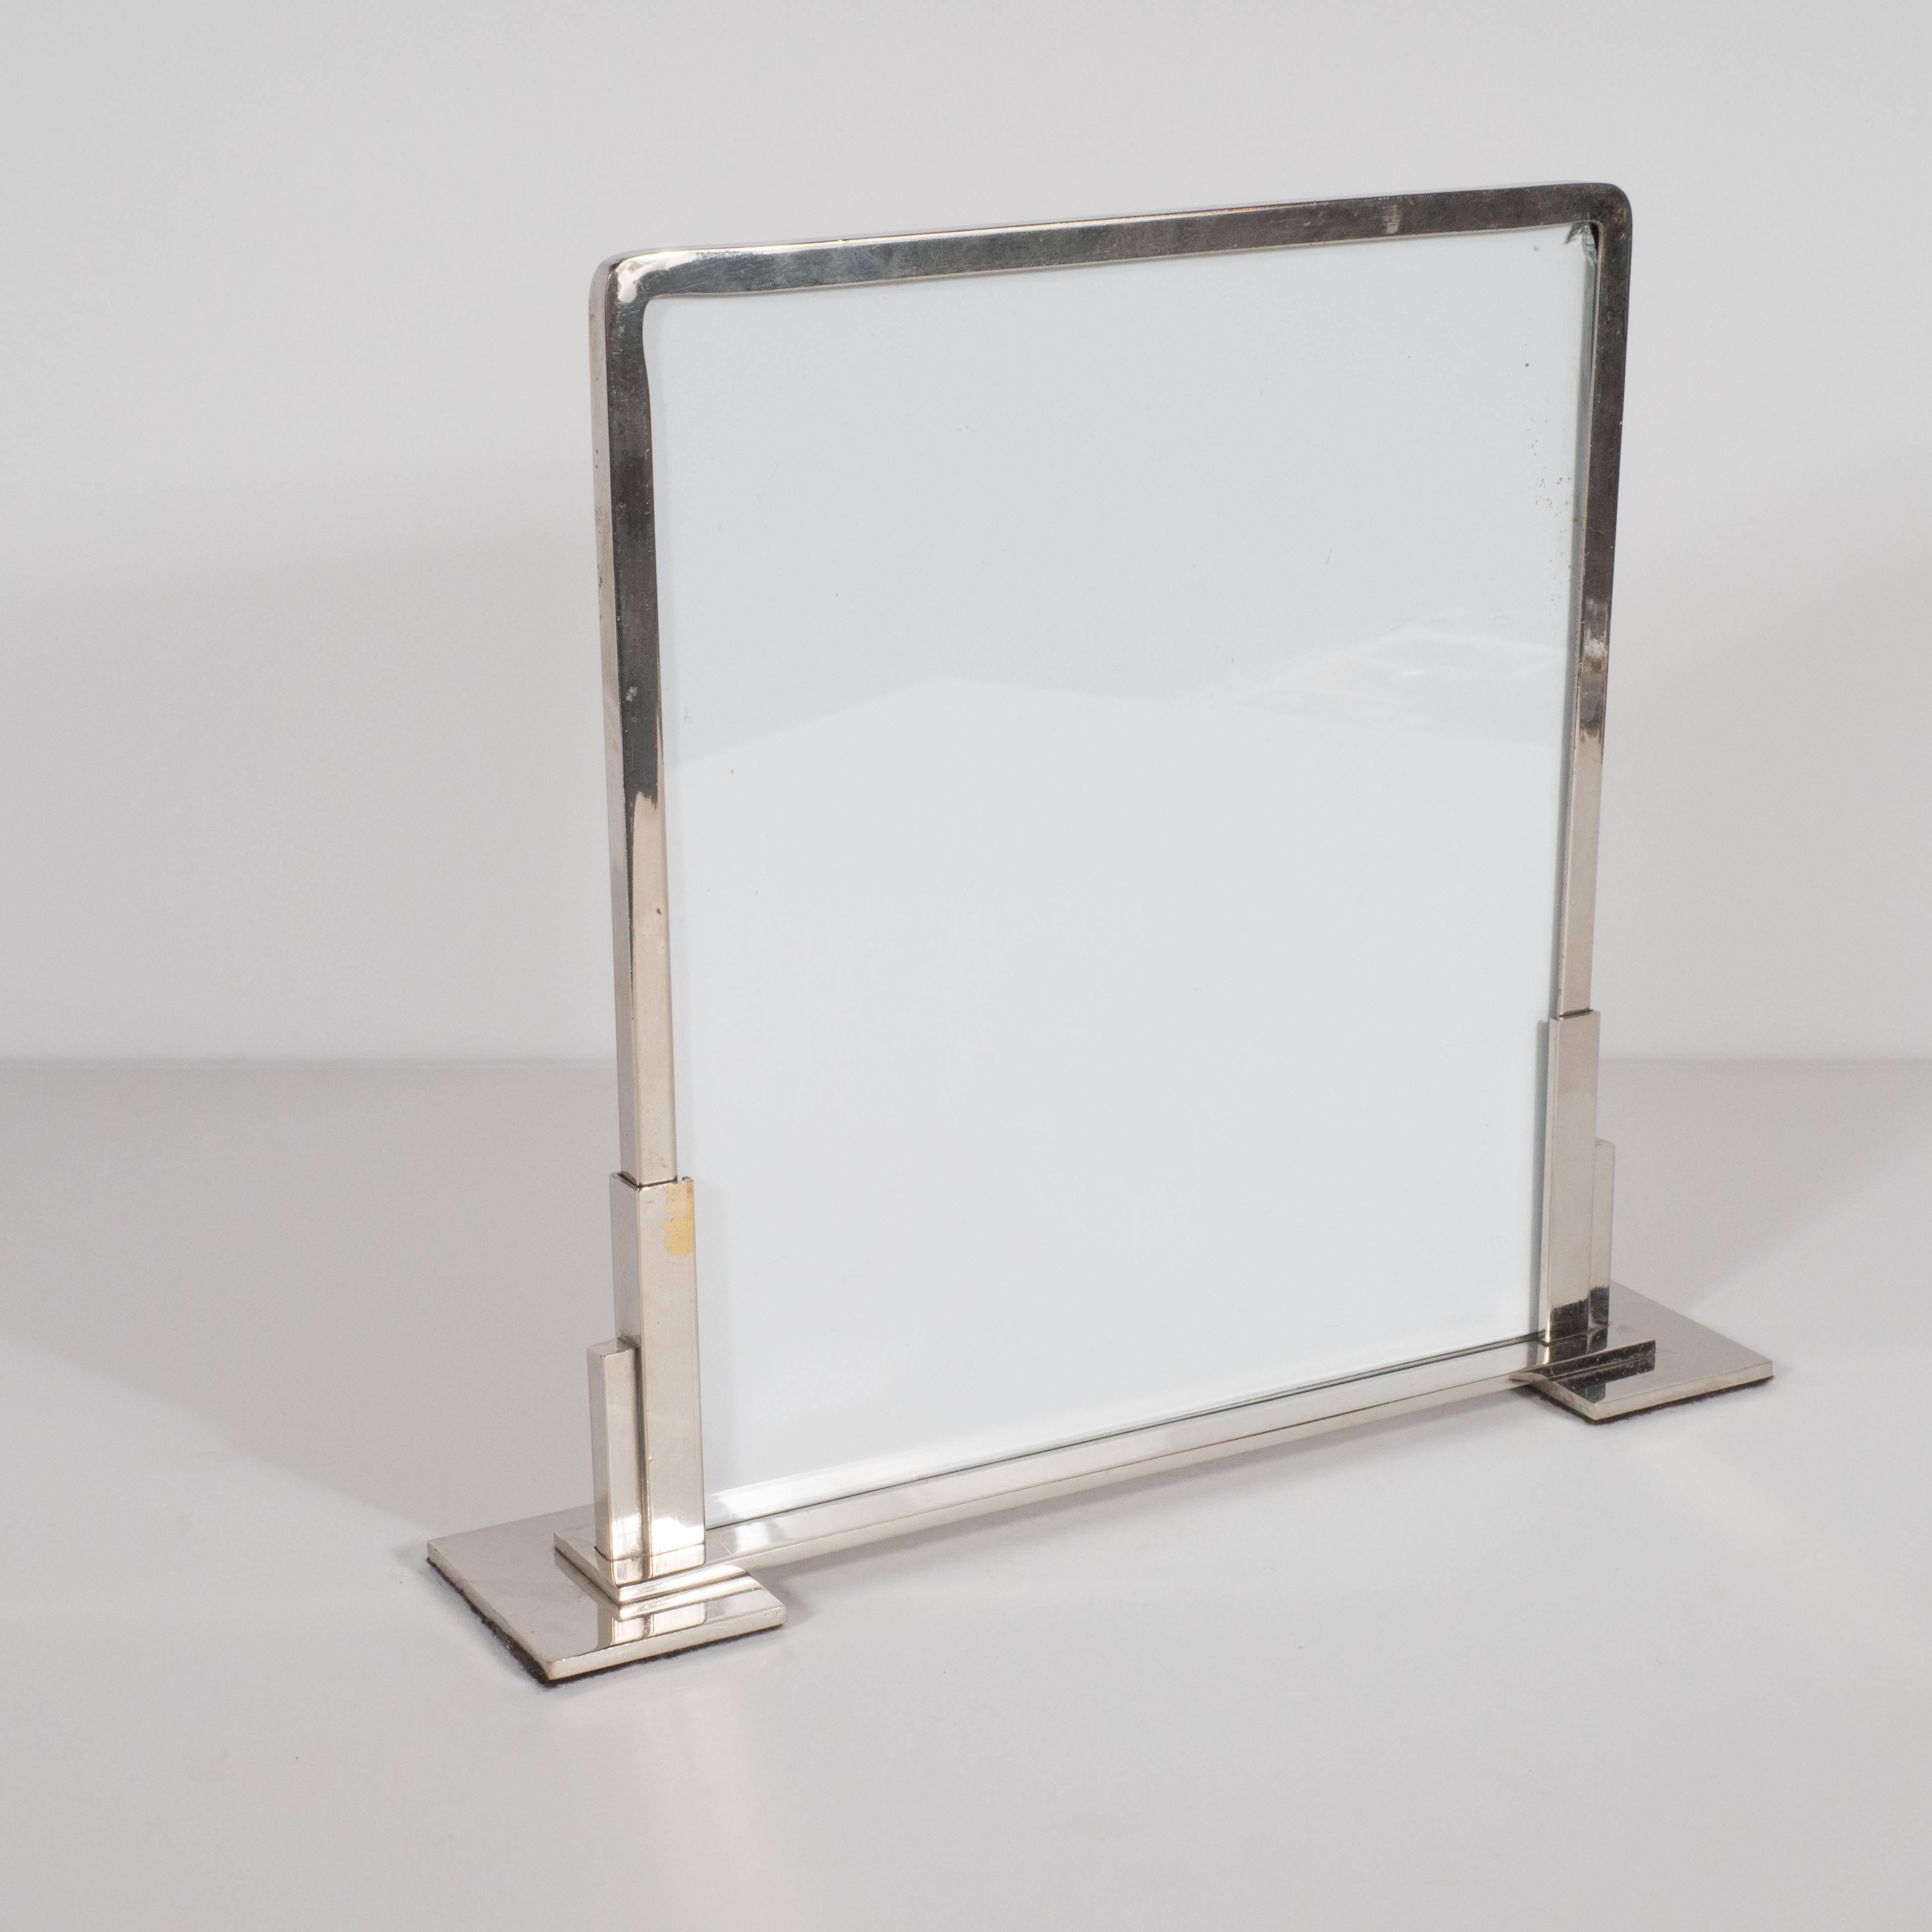 This refined chrome Machine Age picture frame was realized in France, circa 1930, at the height of Art Deco. It is a fine example of the period, with a skyscraper style base supported by flat square feet. It would make a winning acquisition for any